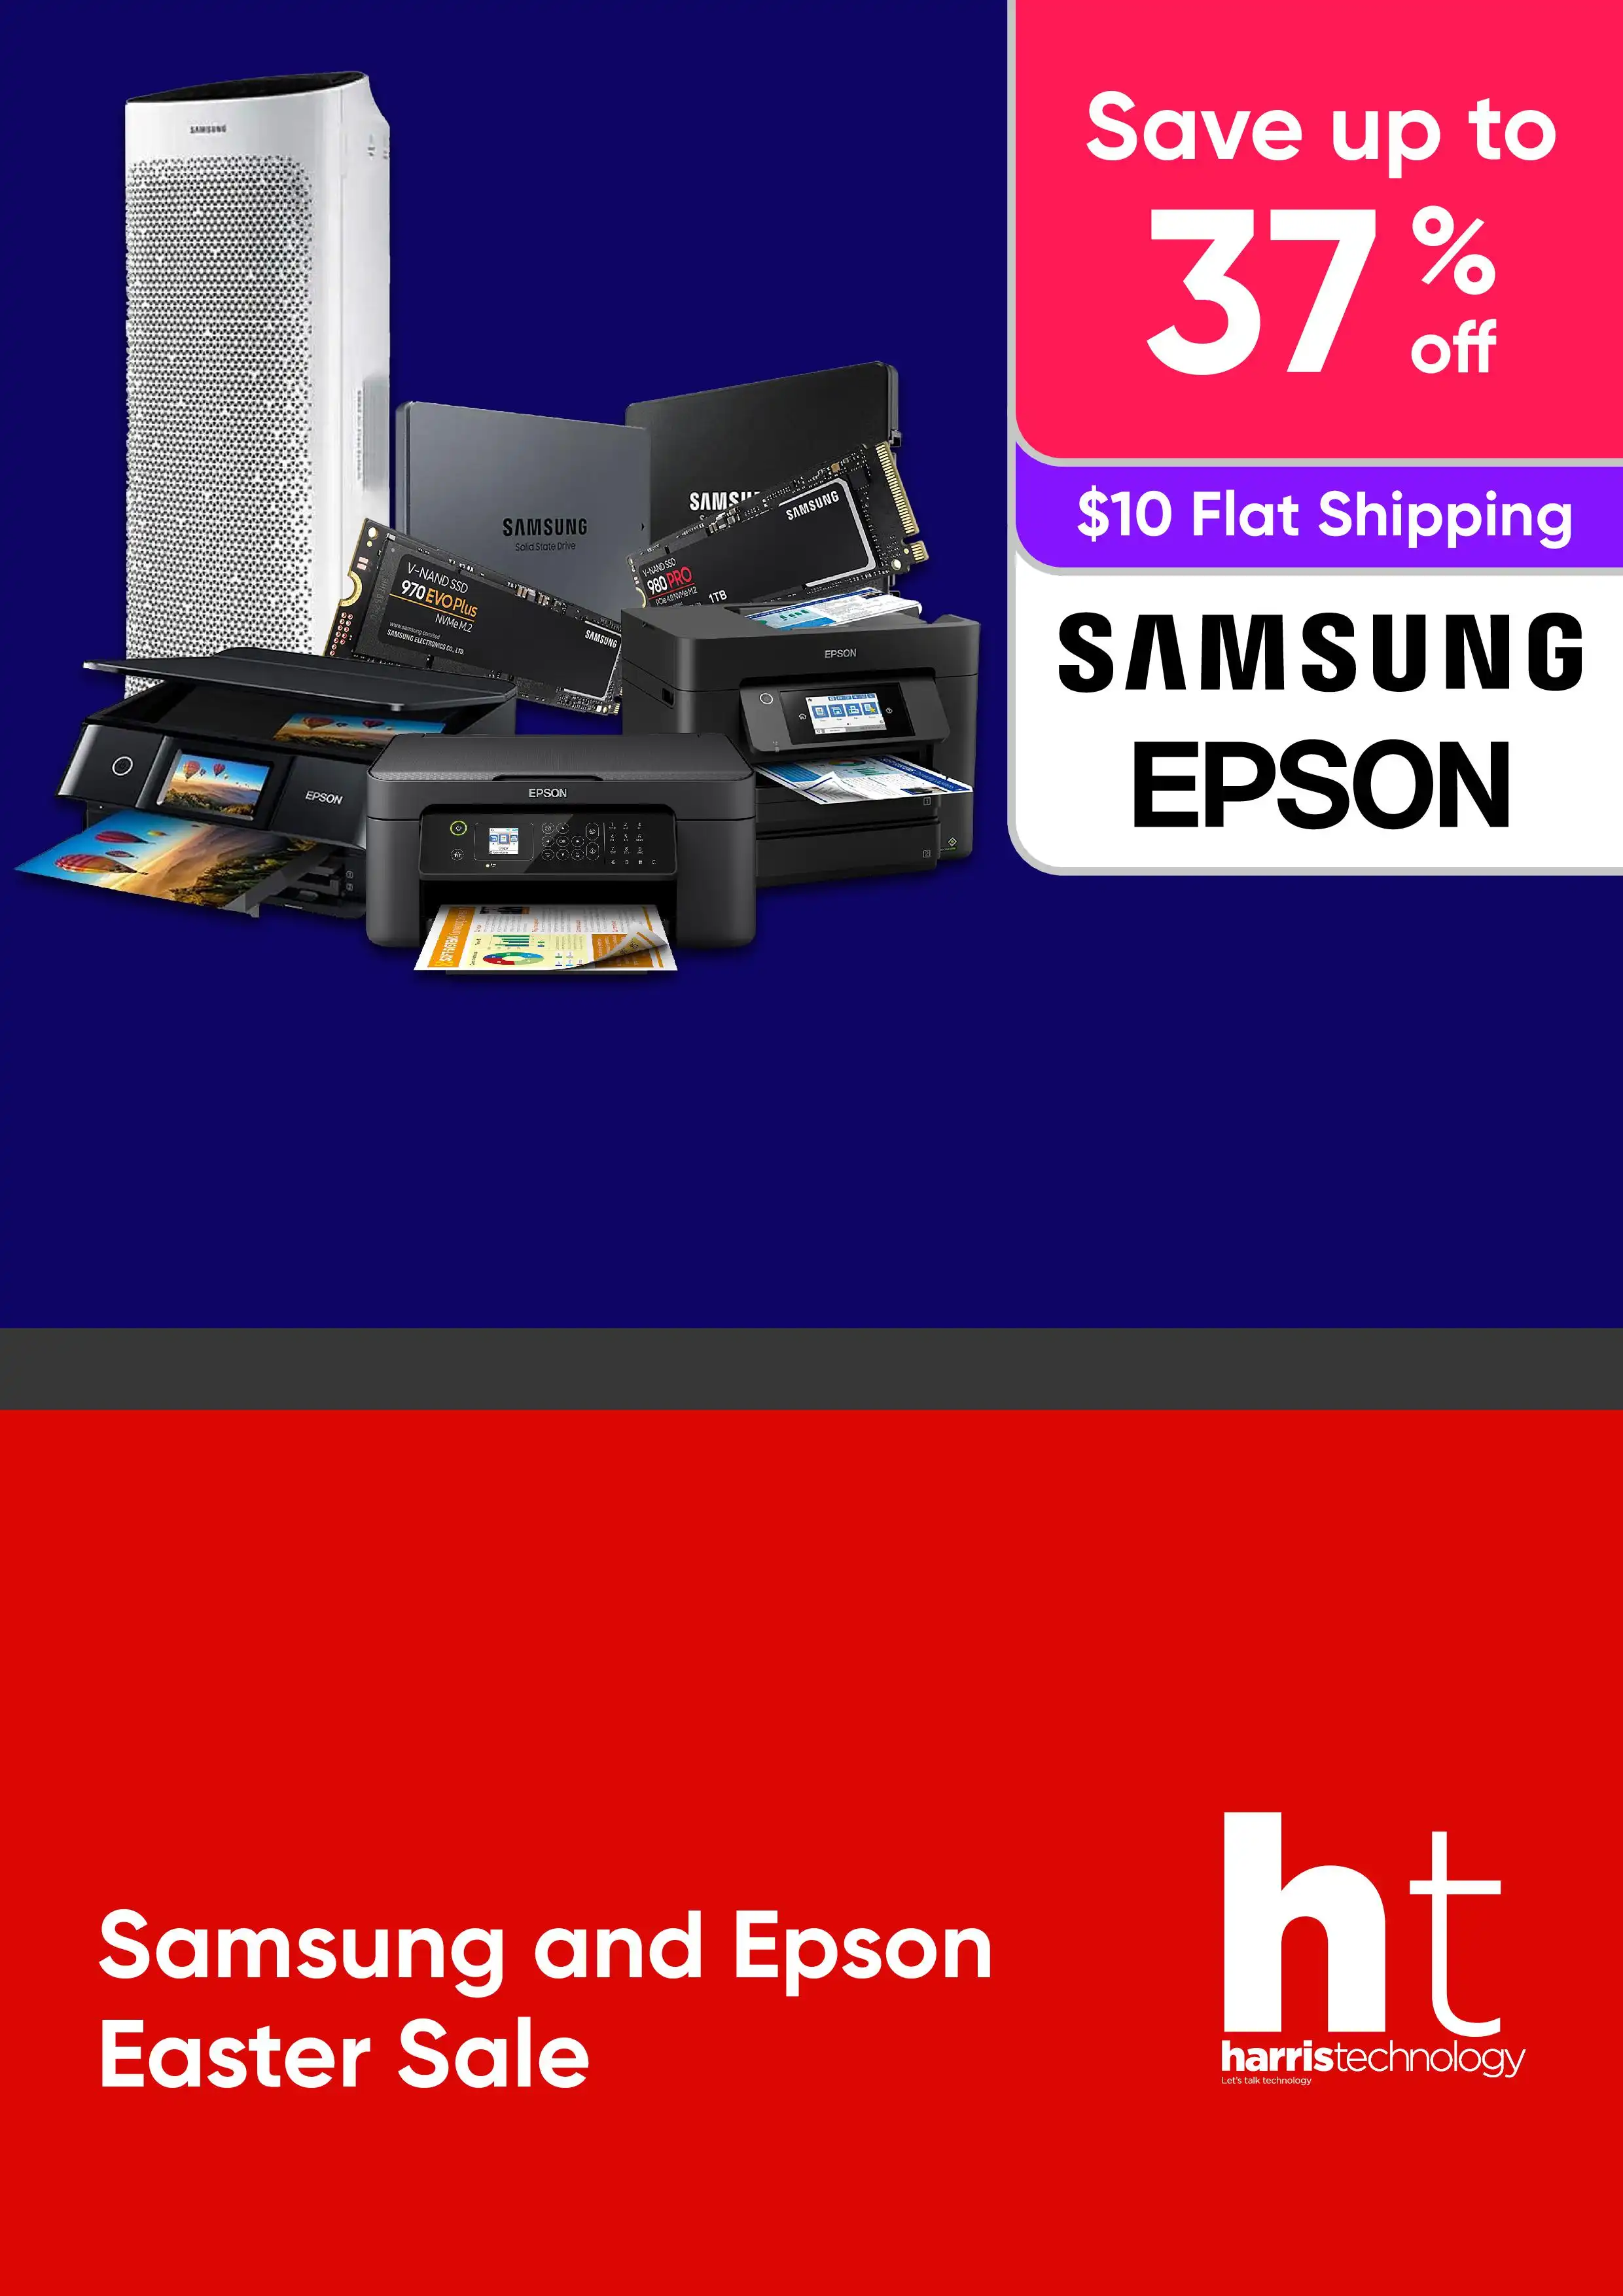 Harris Technology Samsung and Epson Easter Sale - Printers, SSDs and More - Up to 37% Off